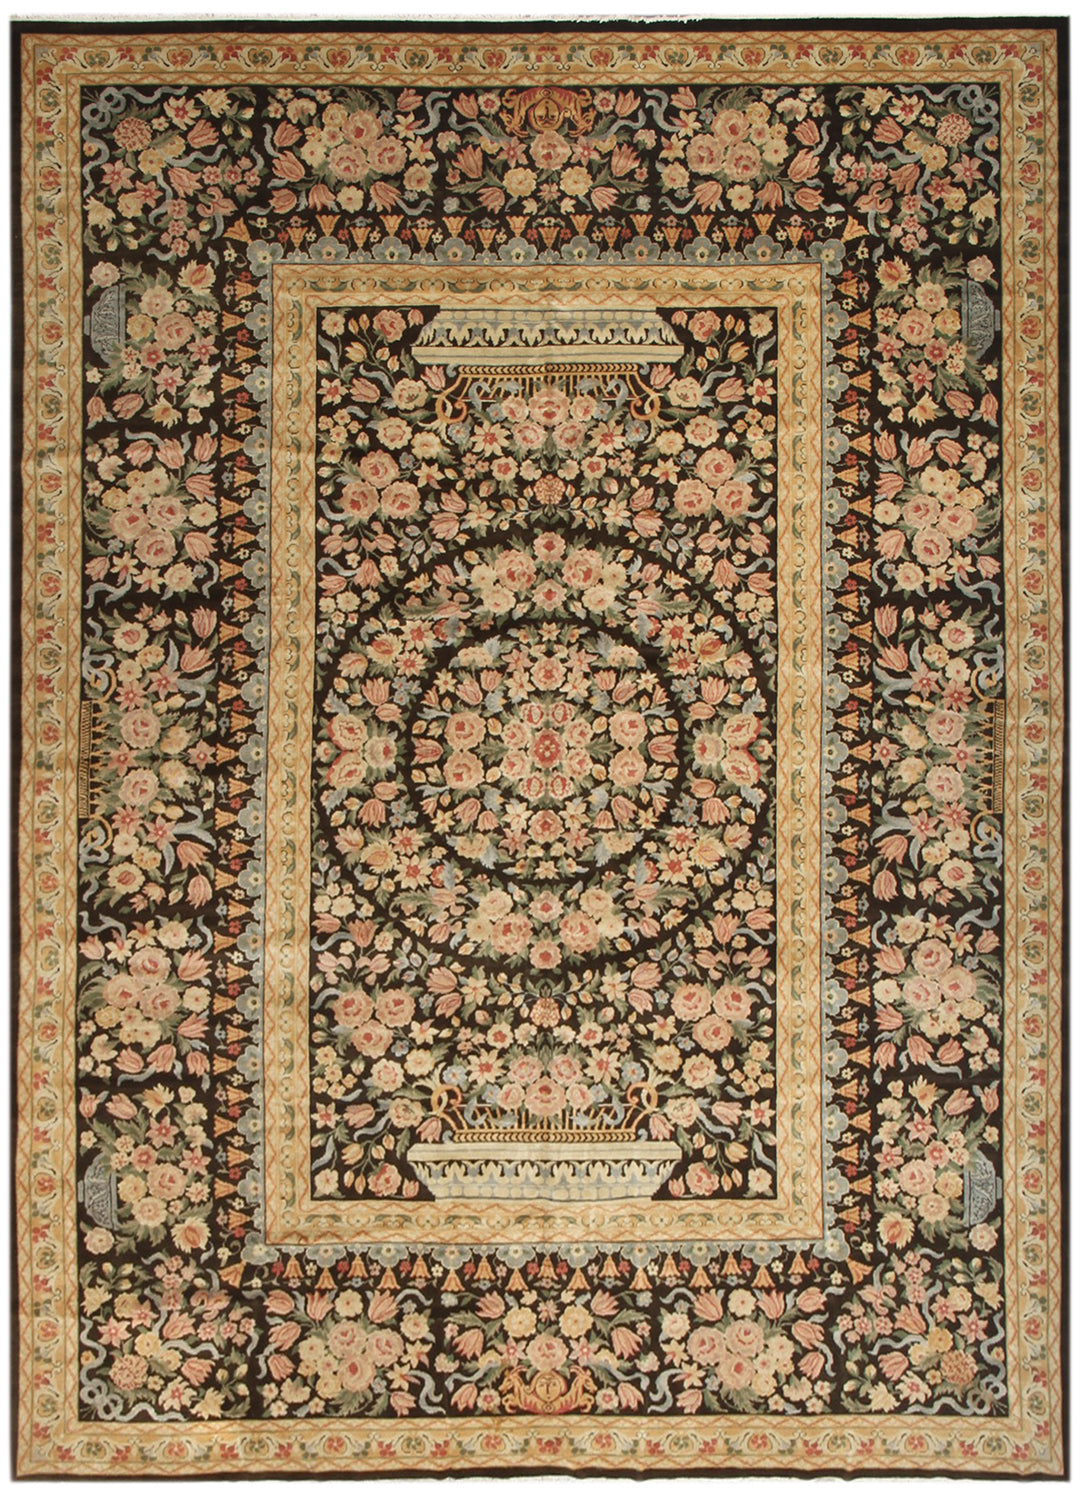 12x16 One a Kind Brown and Gold Floral Savonnerie Style Carpet